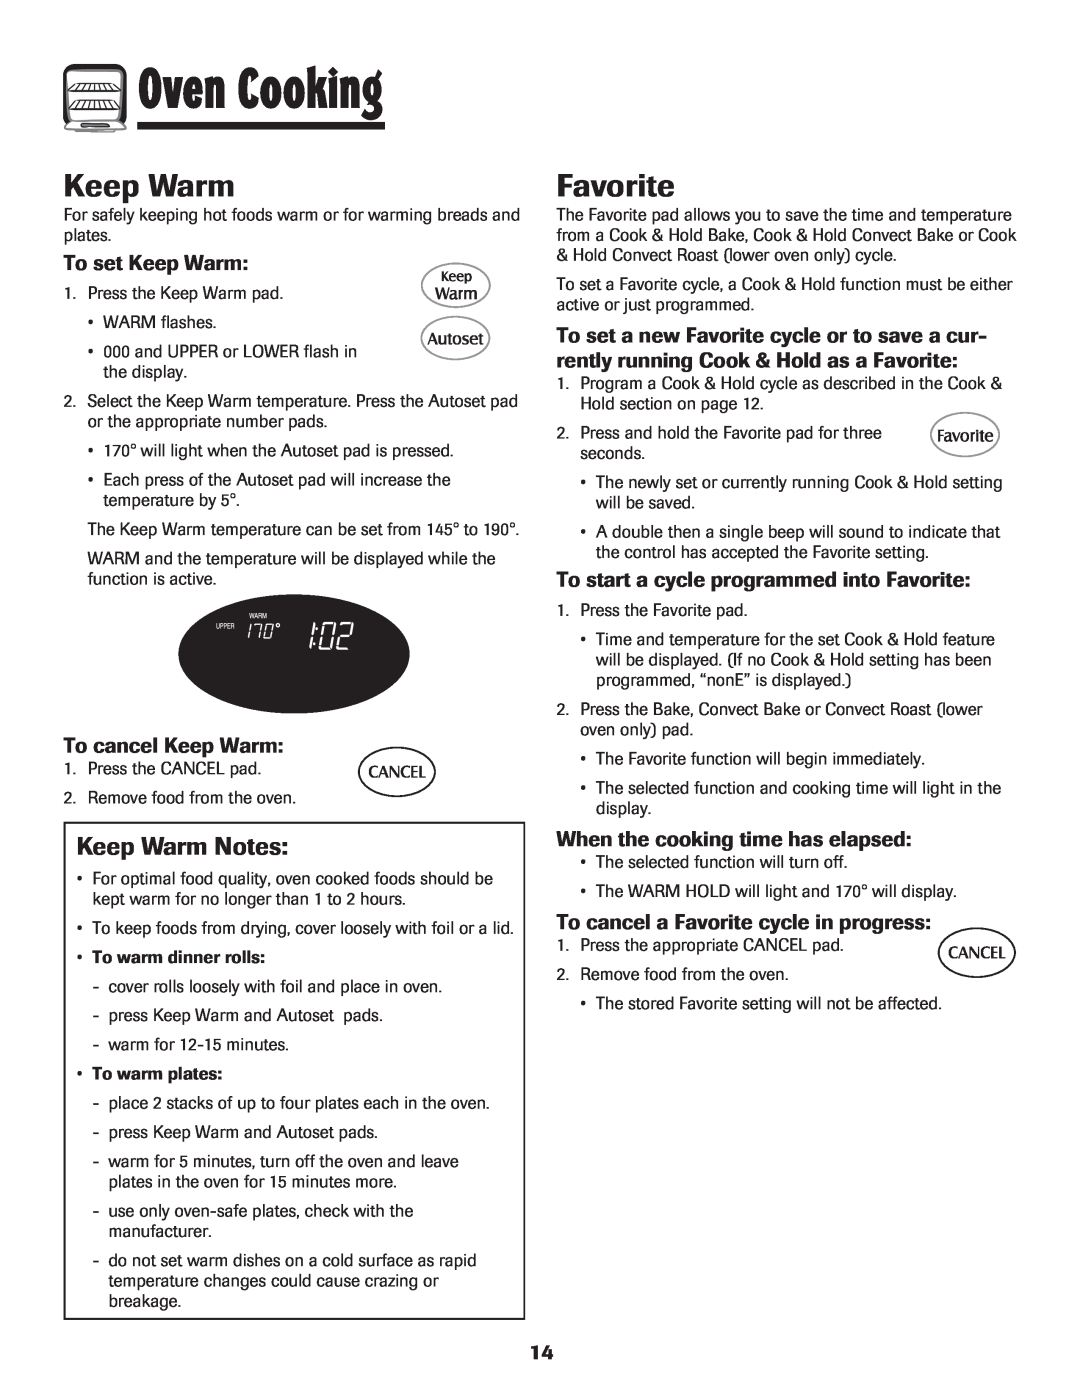 Maytag 850 Keep Warm Notes, To set Keep Warm, To cancel Keep Warm, To start a cycle programmed into Favorite 